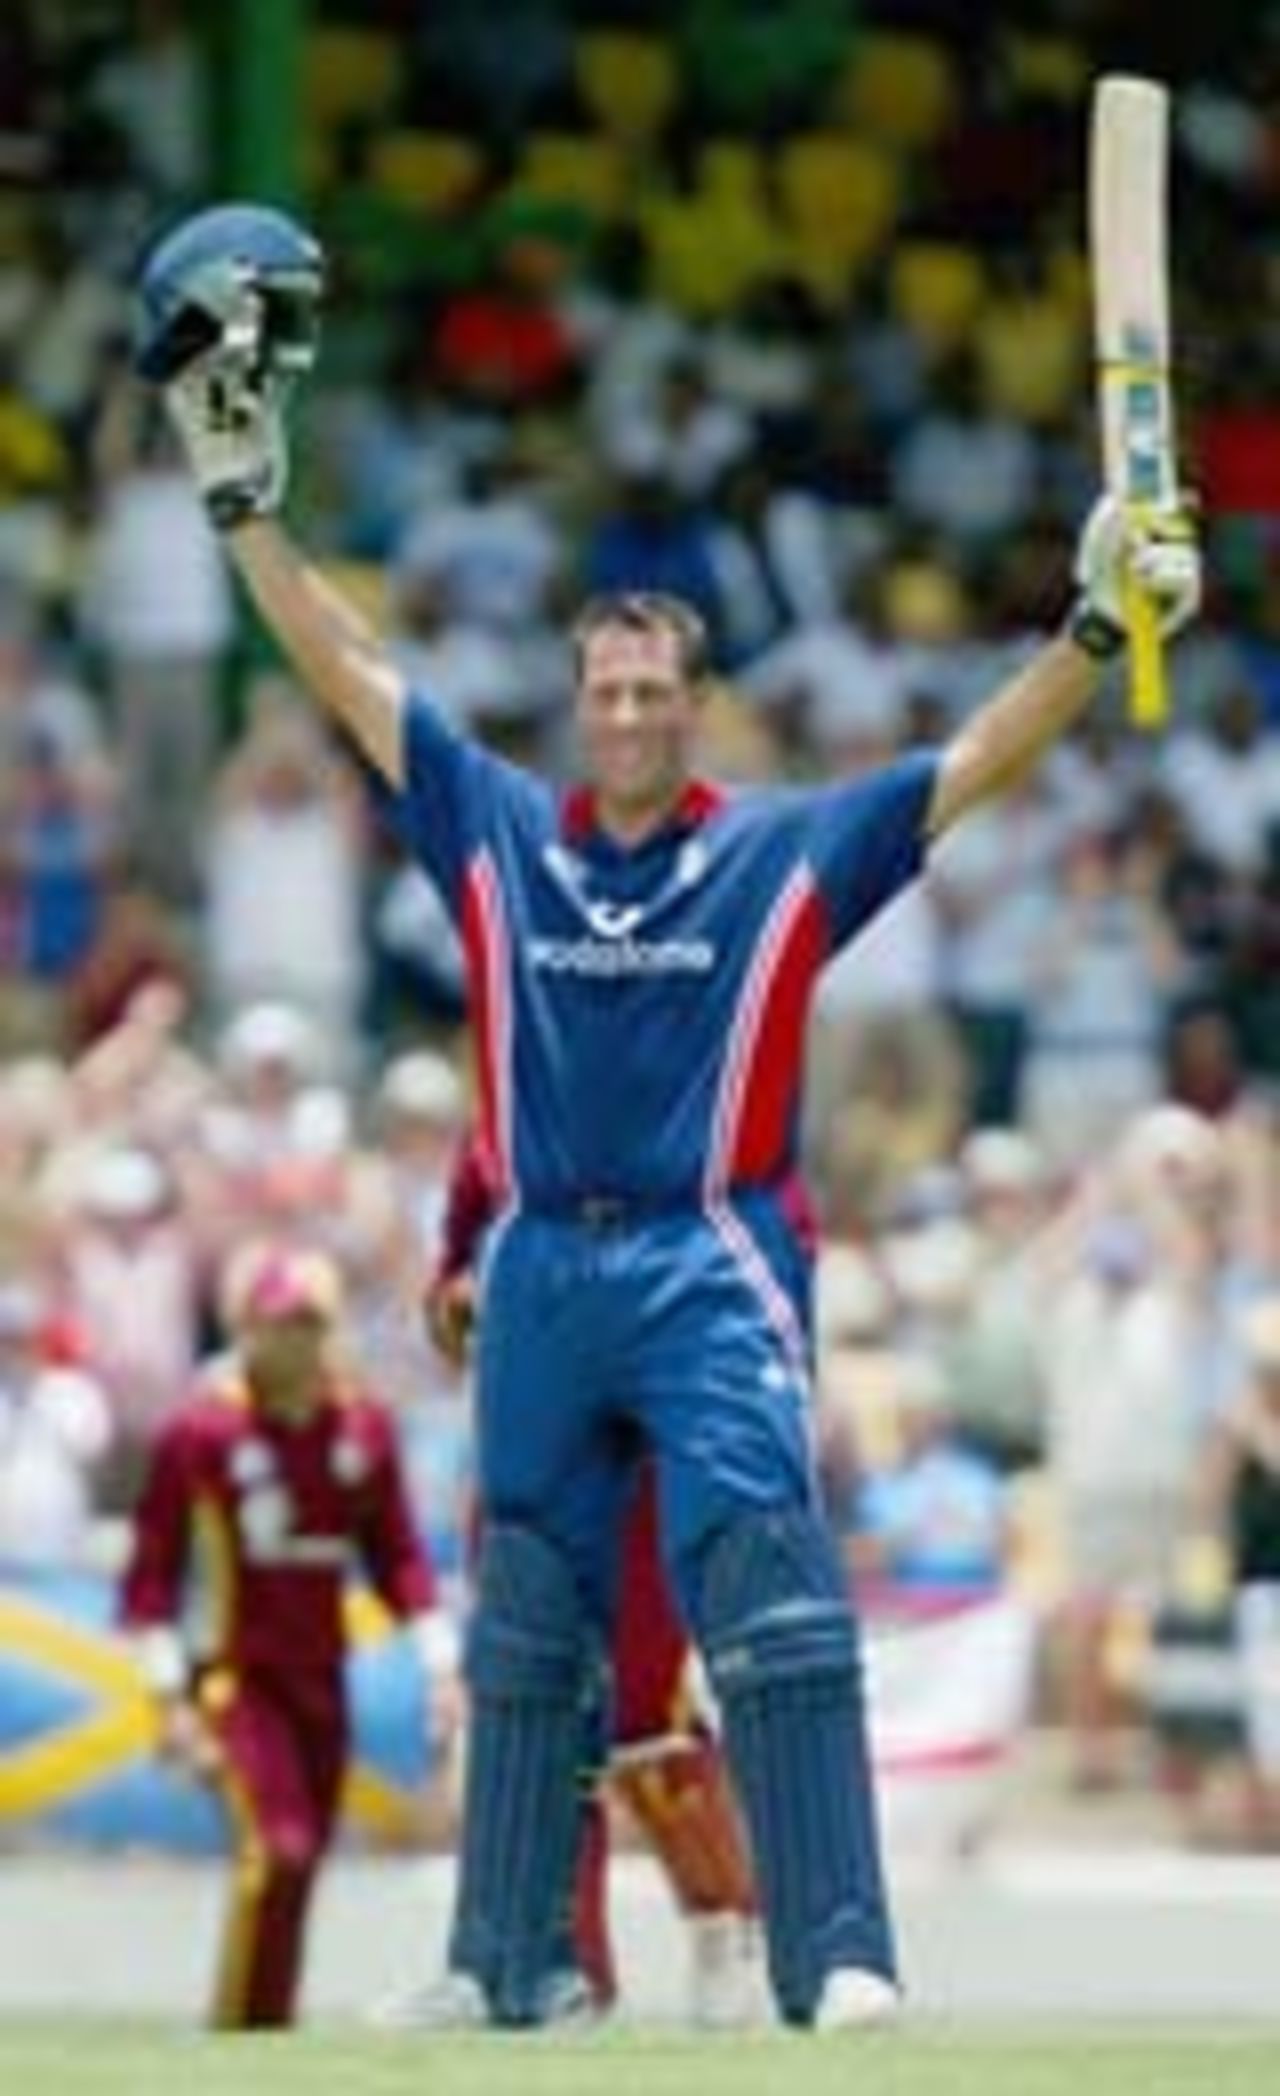 Marcus Trescothick celebrates his hundred, West Indies v England, 5th ODI, St Lucia, May 1, 2004